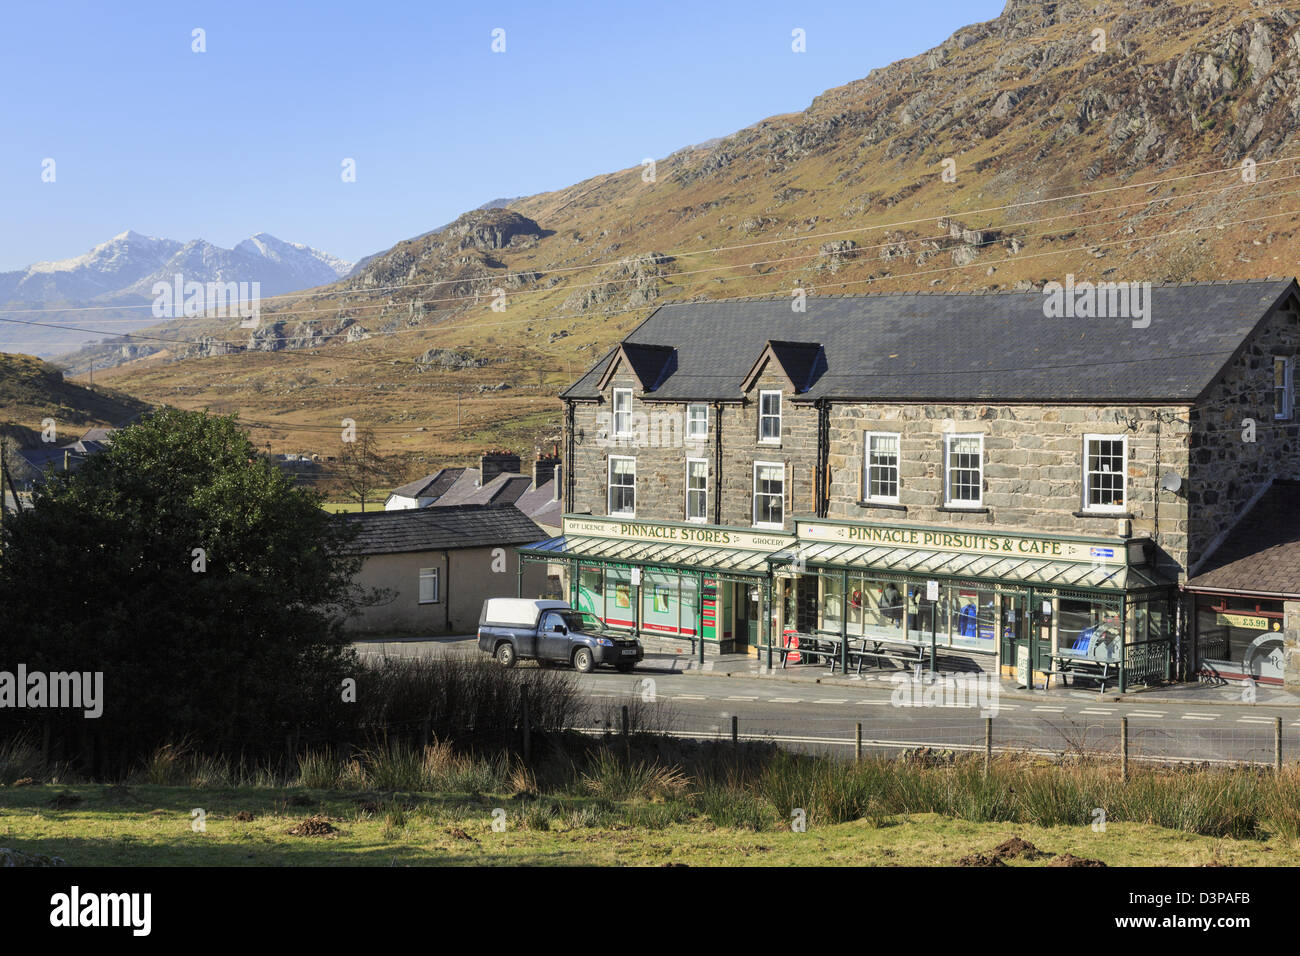 Pinnacle Stores and cafe in Snowdonia National Park, Capel Curig, Conwy, North Wales, UK, Britain Stock Photo